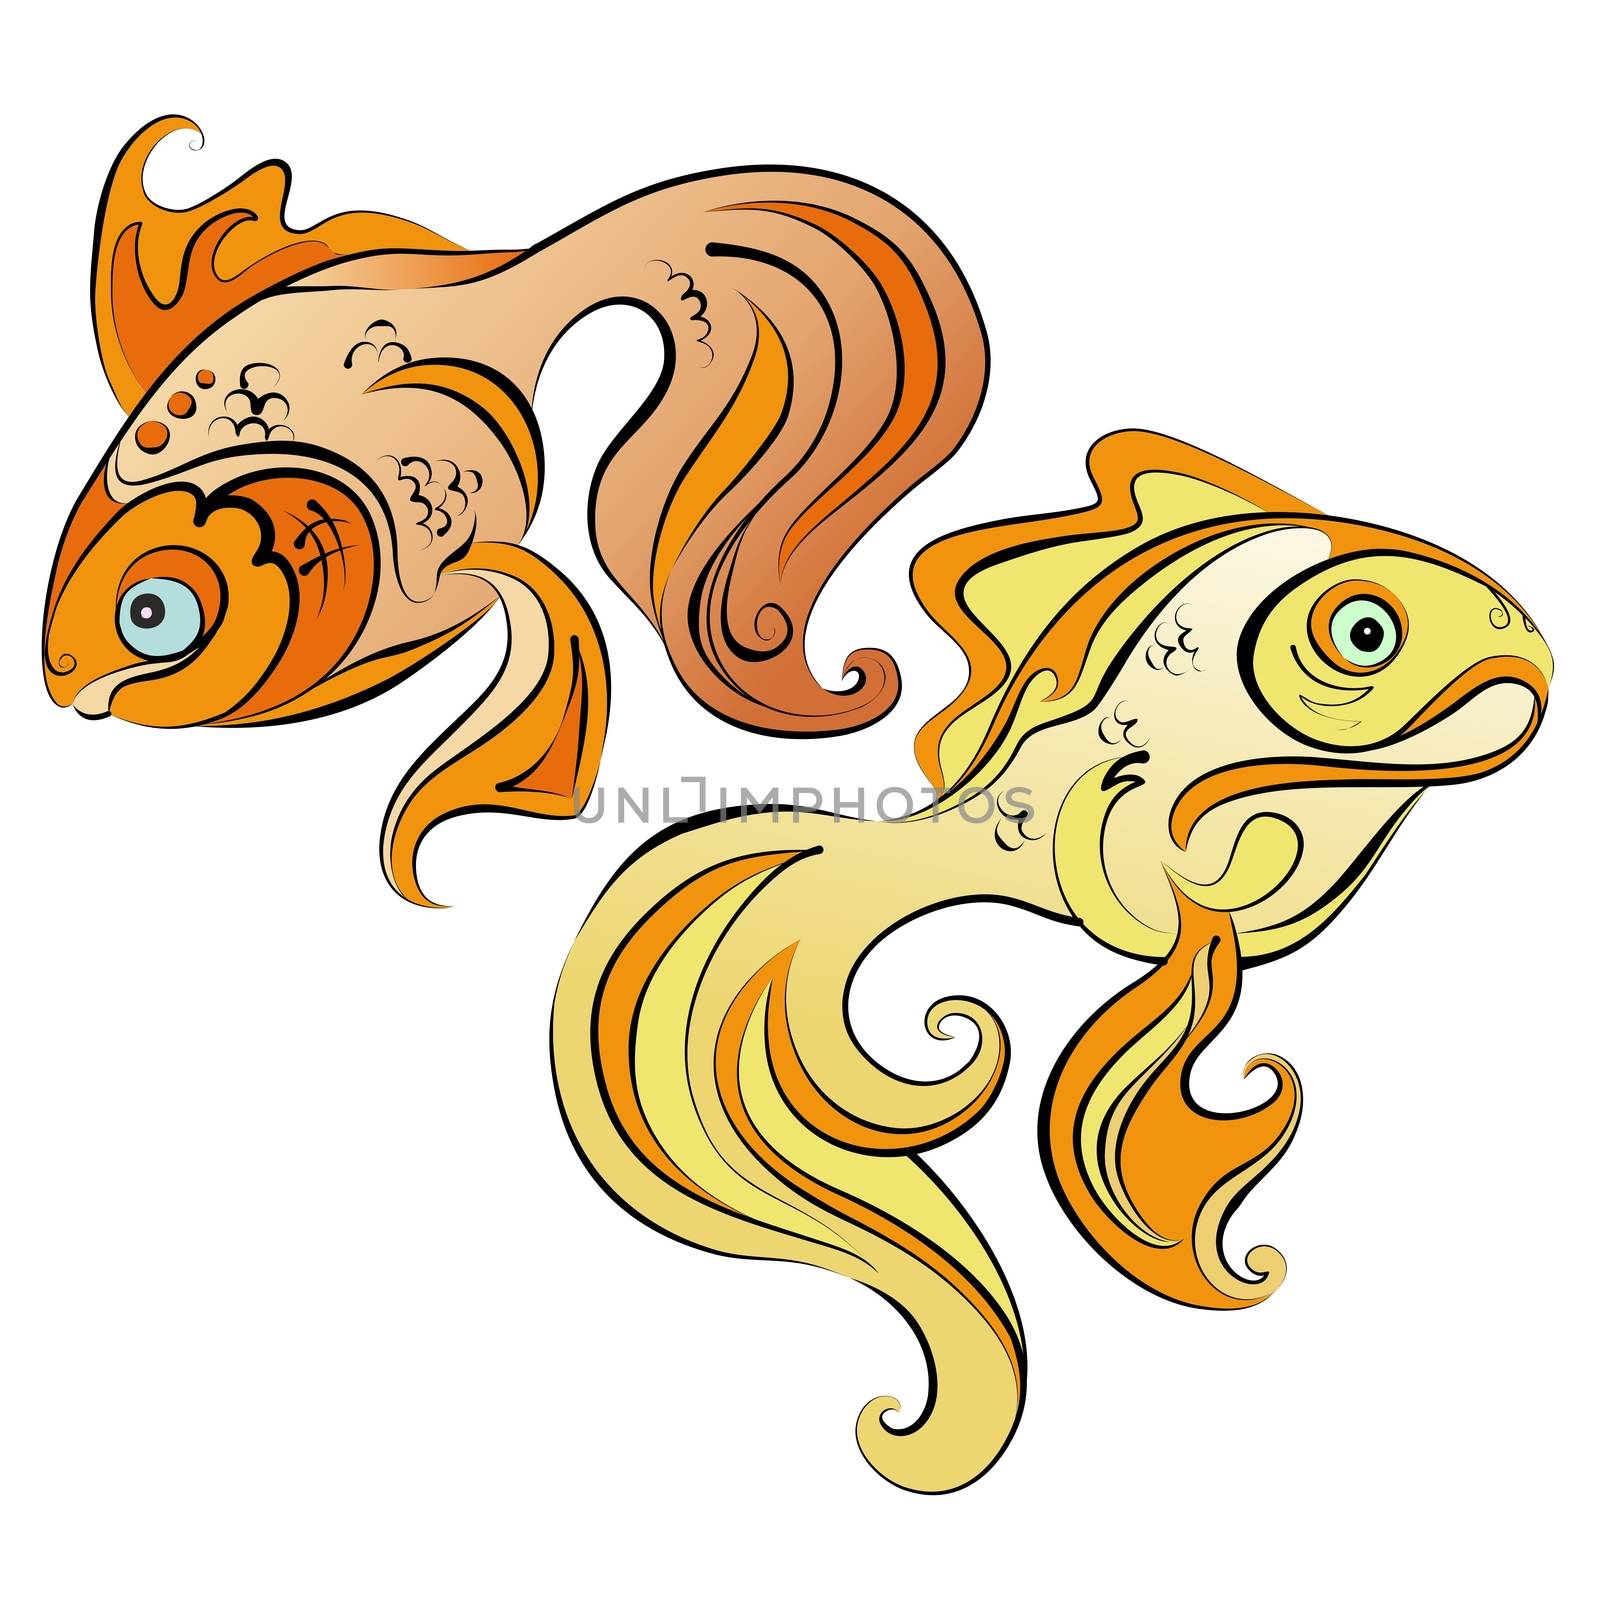 Illustration of two stylized gold fish on white background by Madhourse